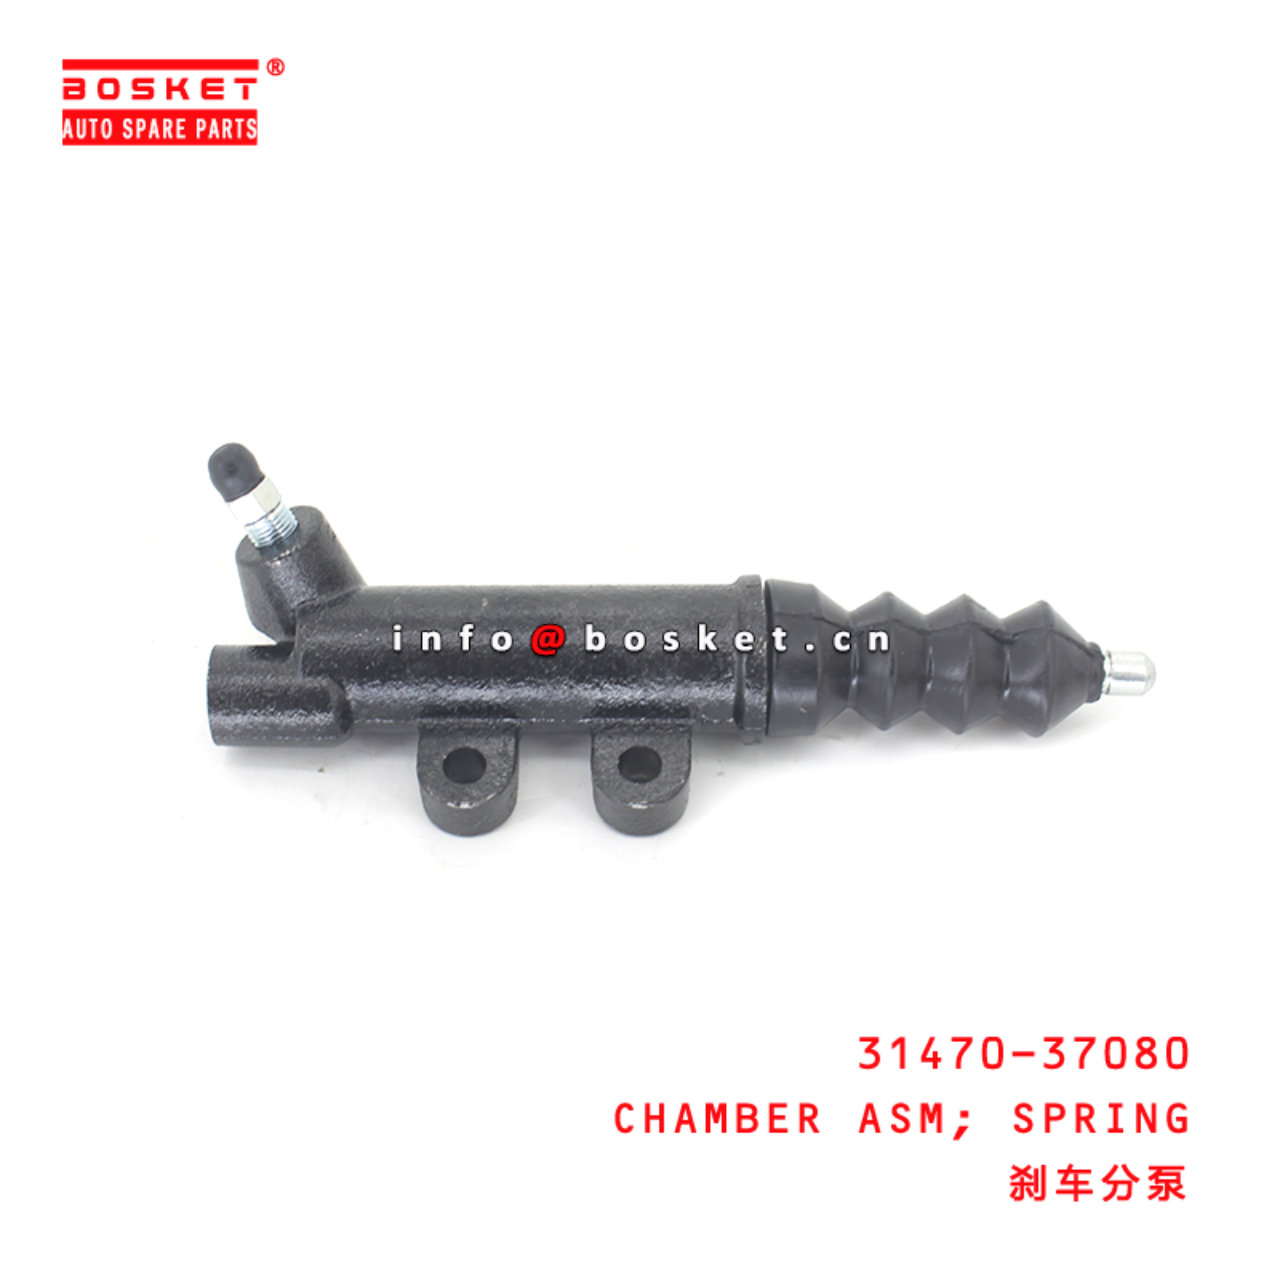 31470-37080 Spring Chamber Assembly Suitable for ISUZU